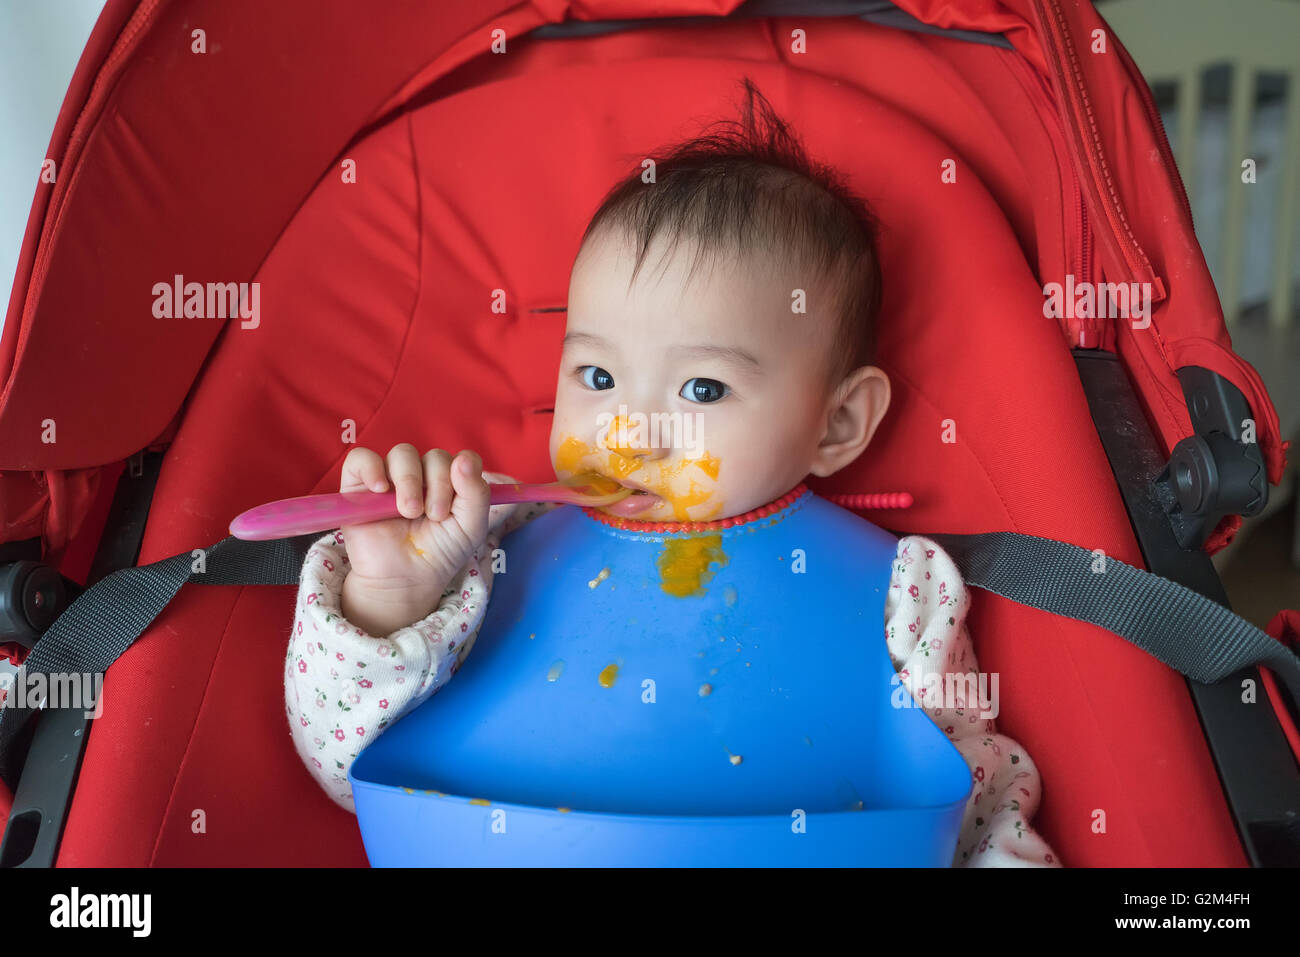 one year old baby eating alone Stock Photo